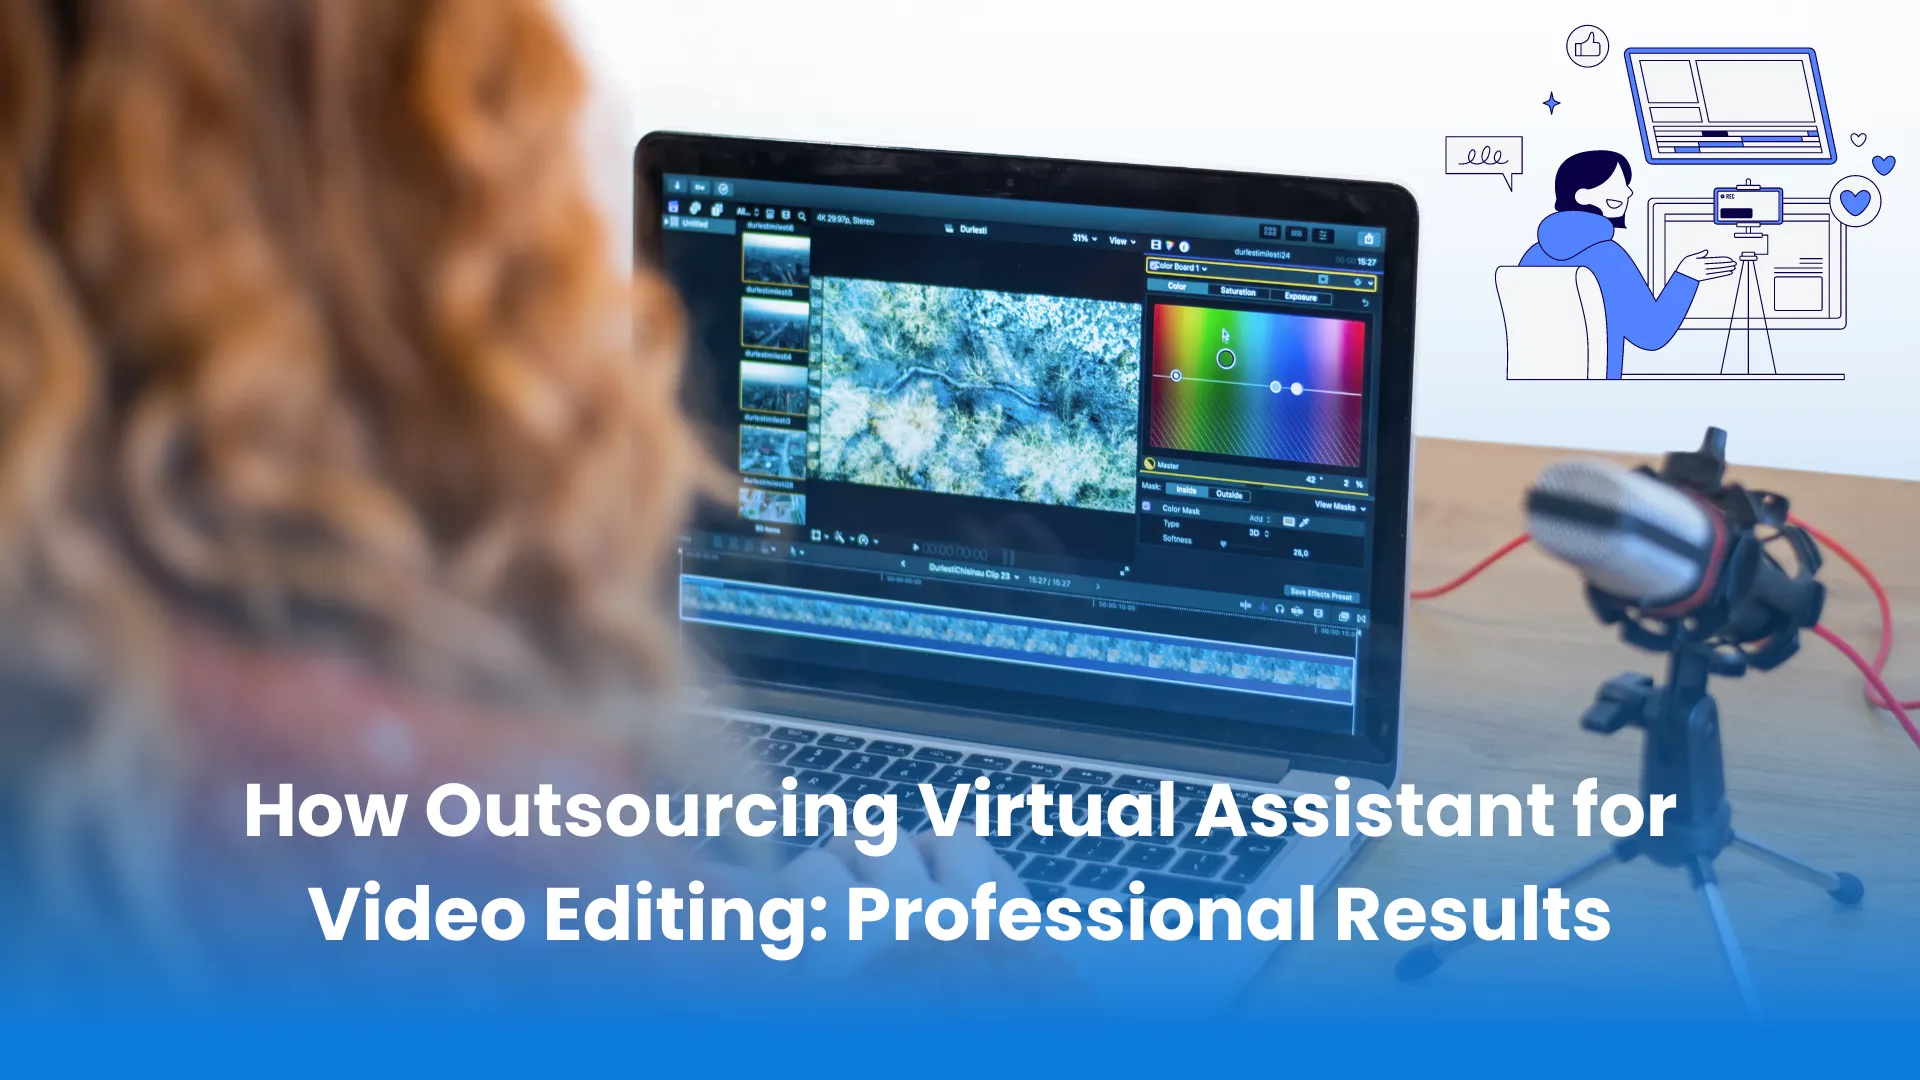 How Outsourcing Virtual Assistant for Video Editing: Professional Results